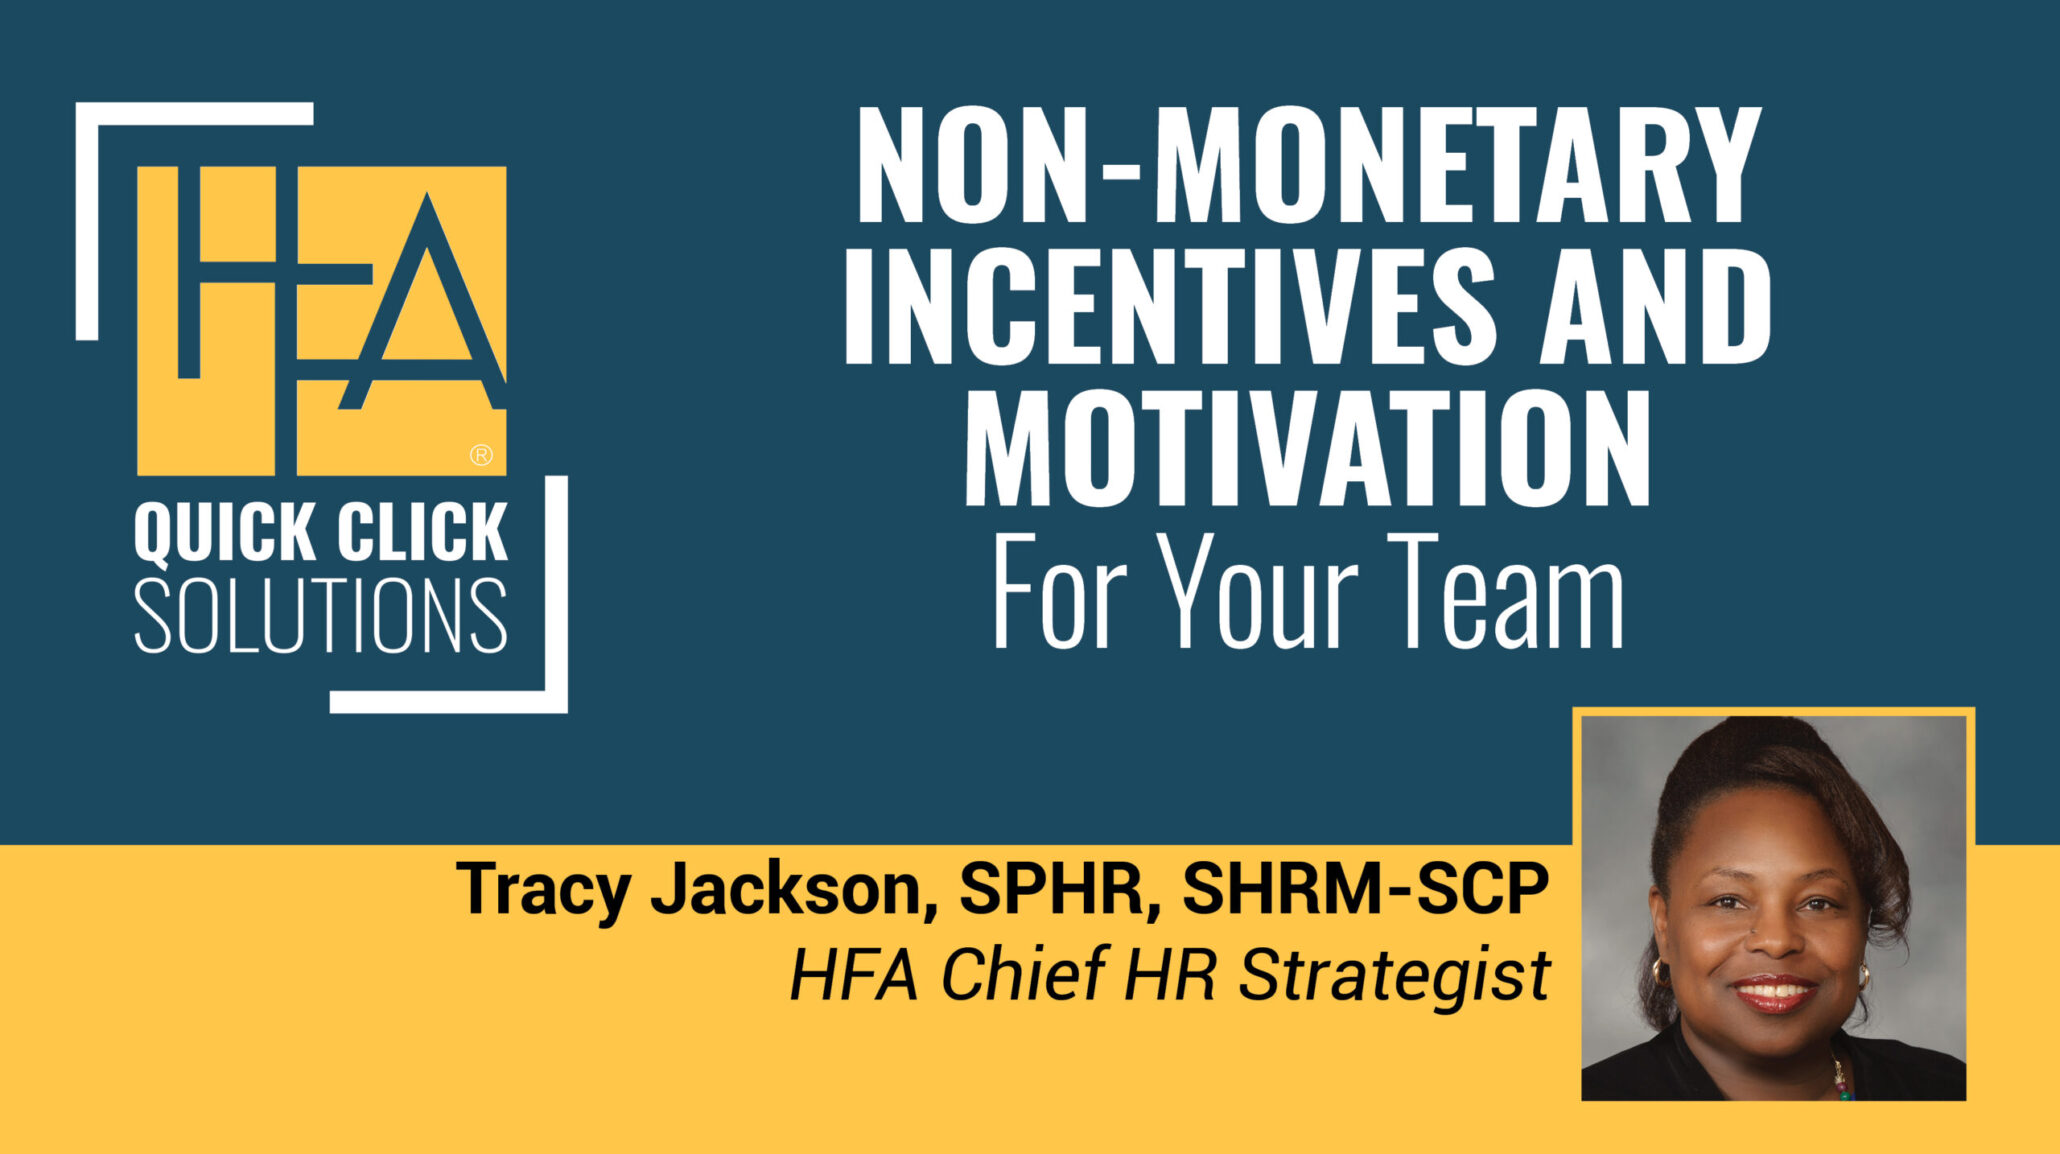 HFA-QCS-Non-Monetary Incentives for Your Team